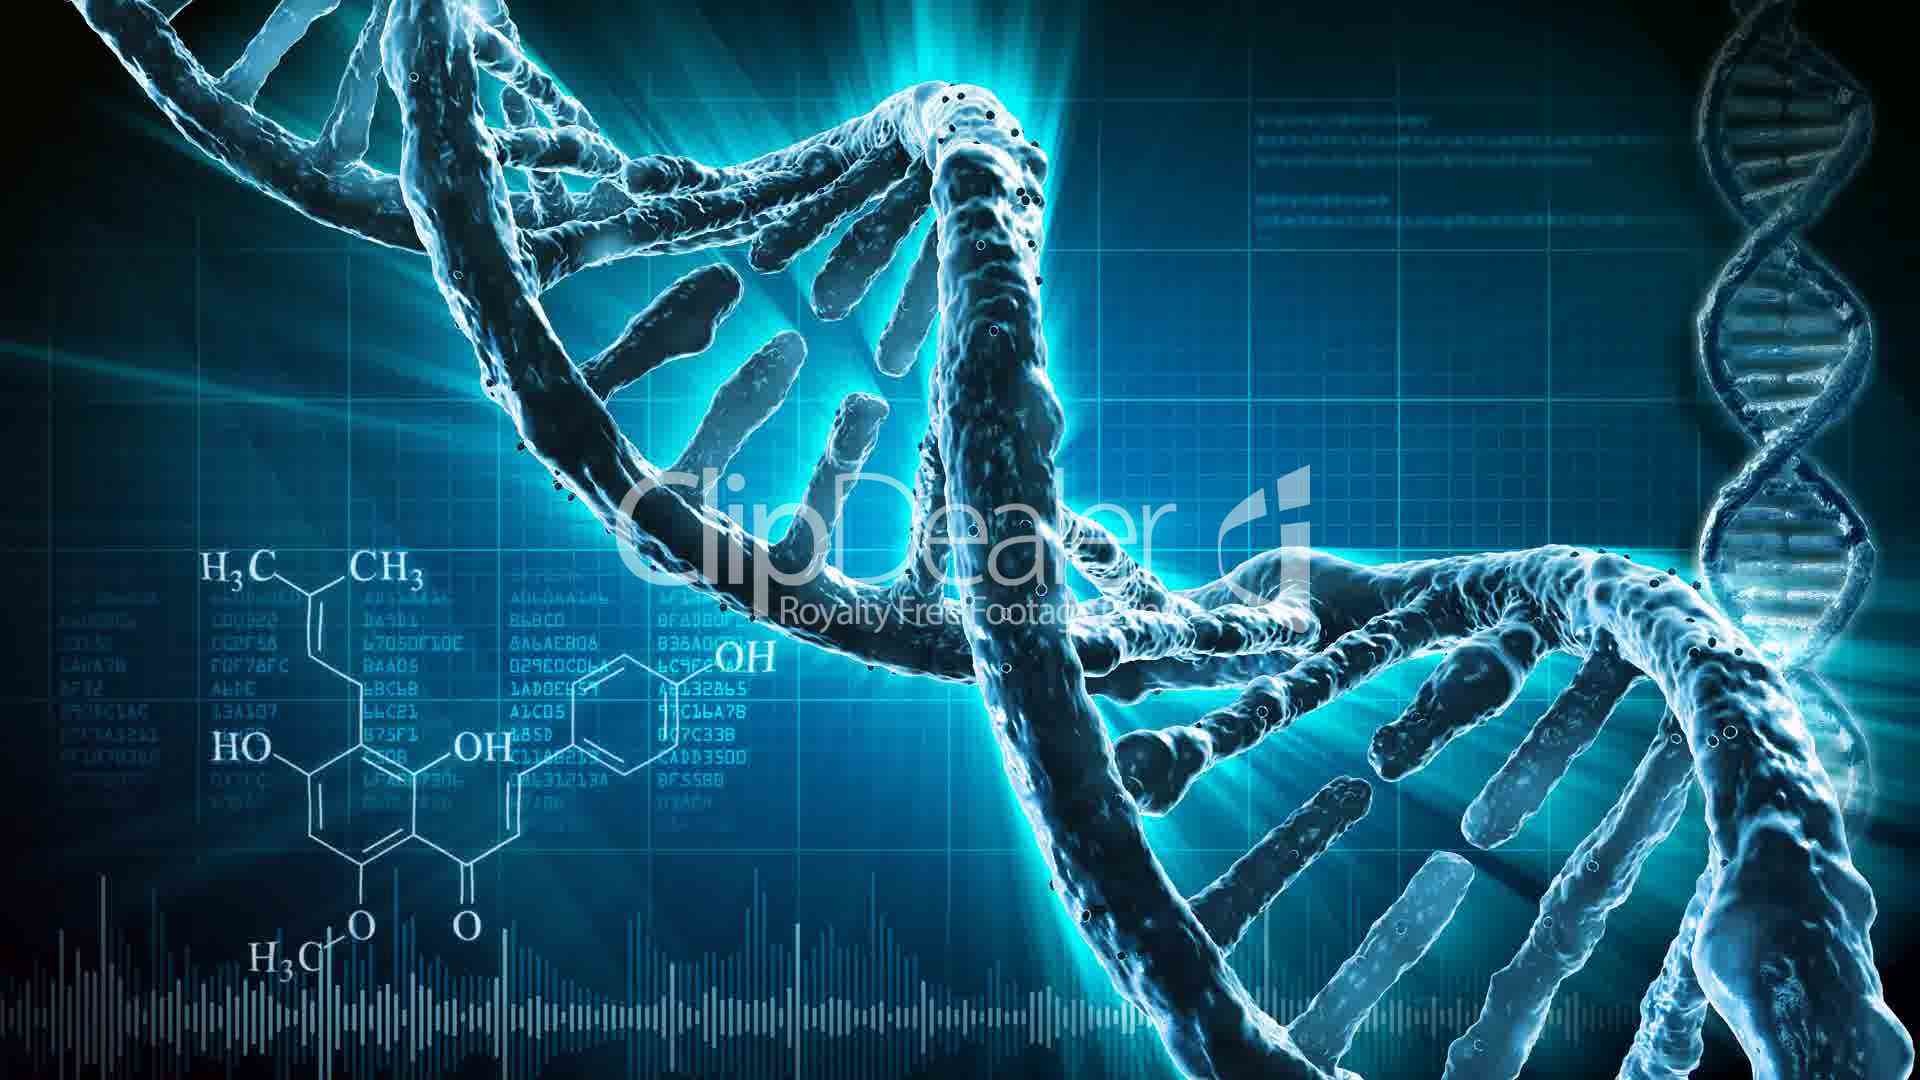 1920x1080 HD DNA Chemistry Science Wallpaper HD Full Size - HiReWallpapers 7536